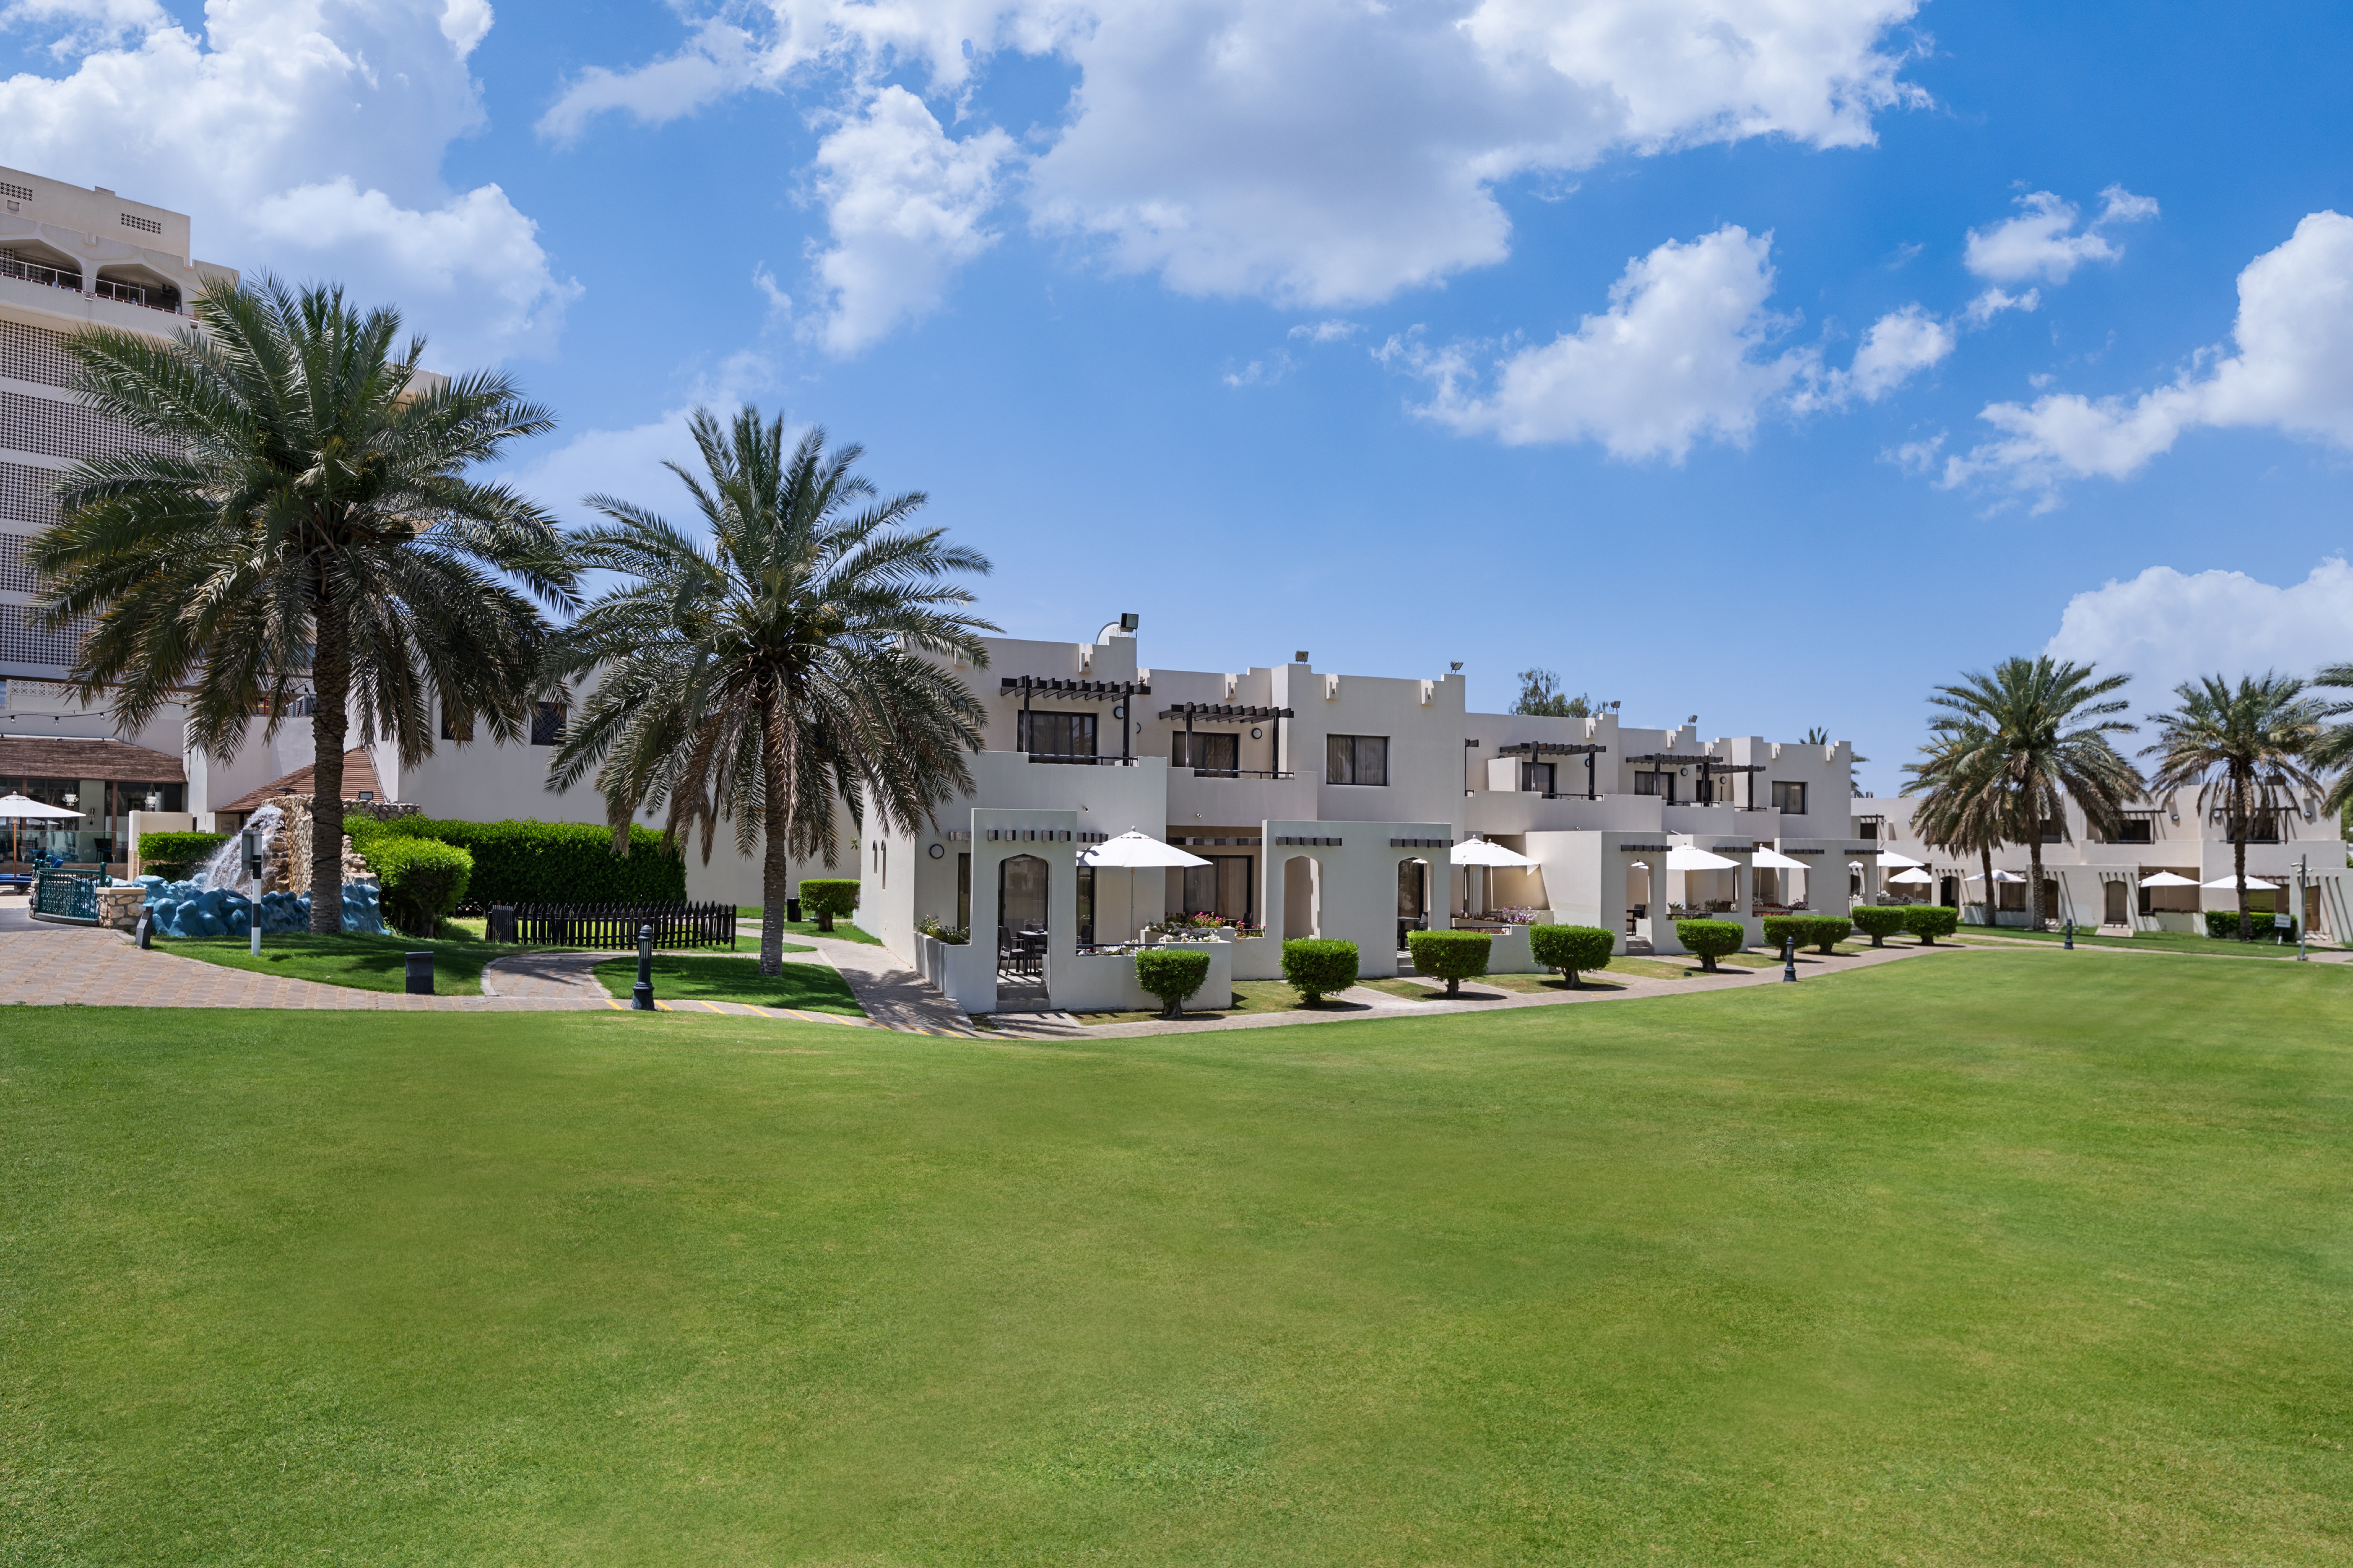 One of Al Ain's resort hotels with small buildings surrounding a green space